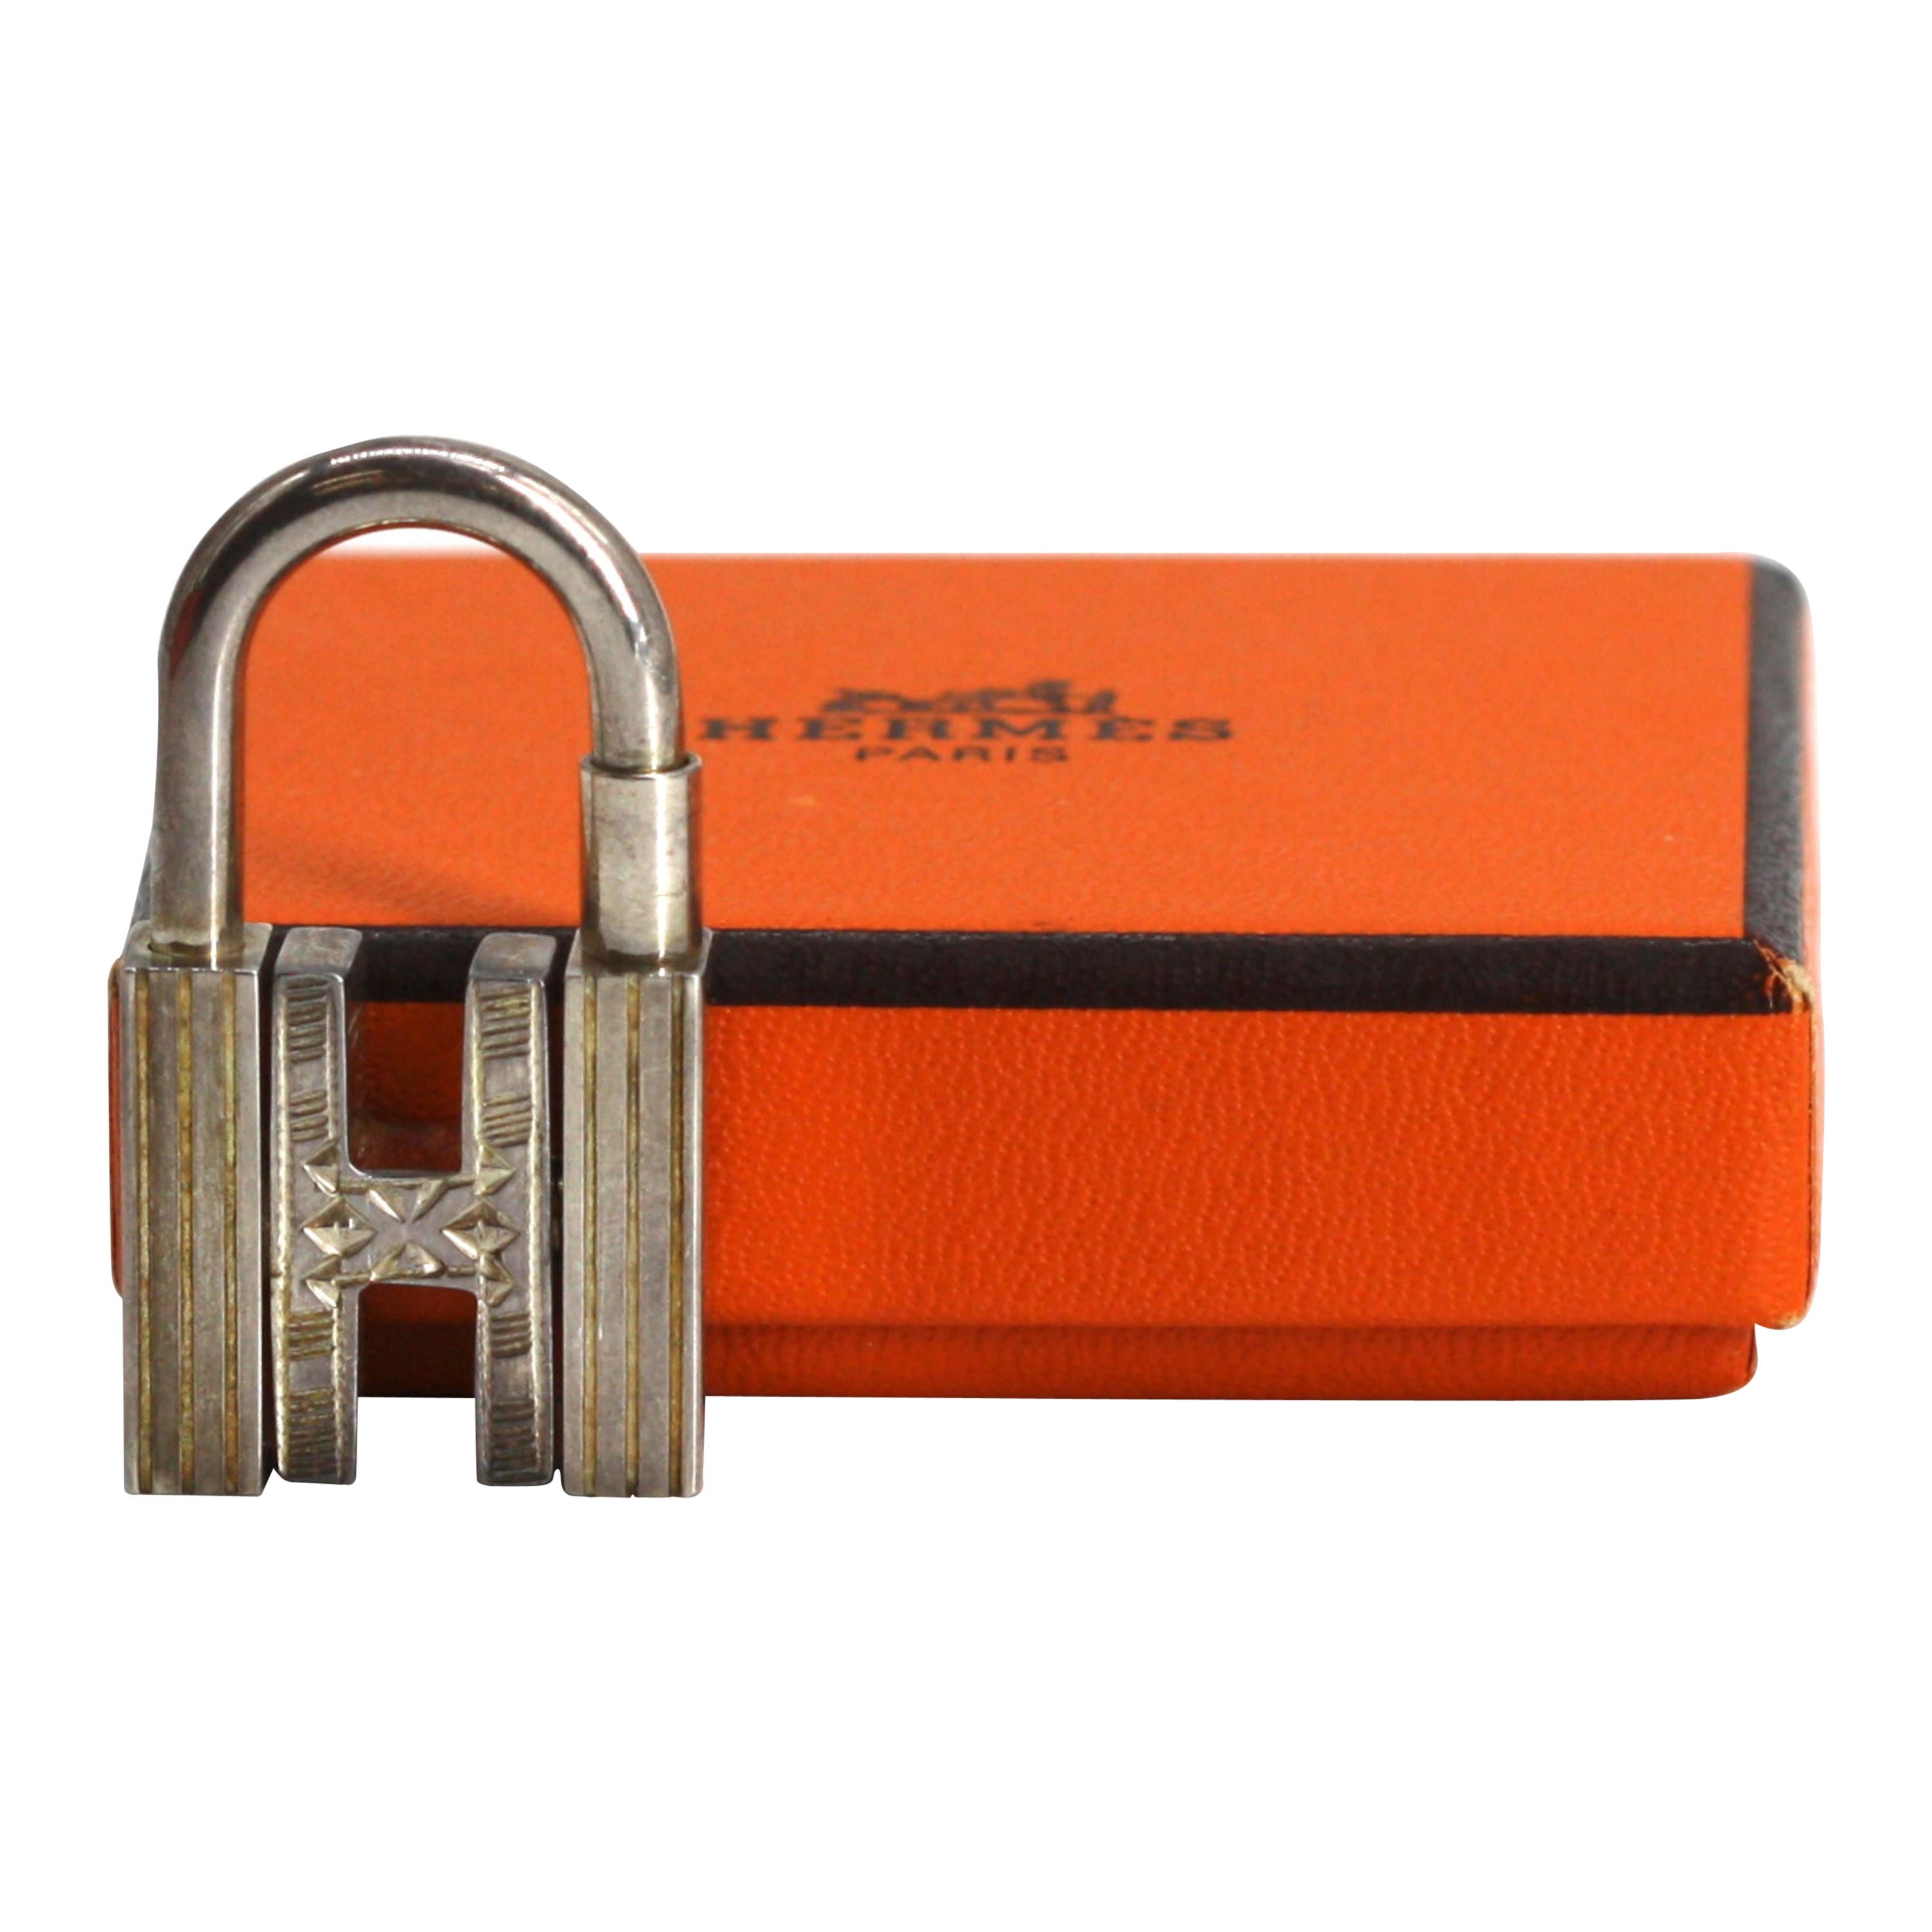 What is the lock for on a Hermès bag?